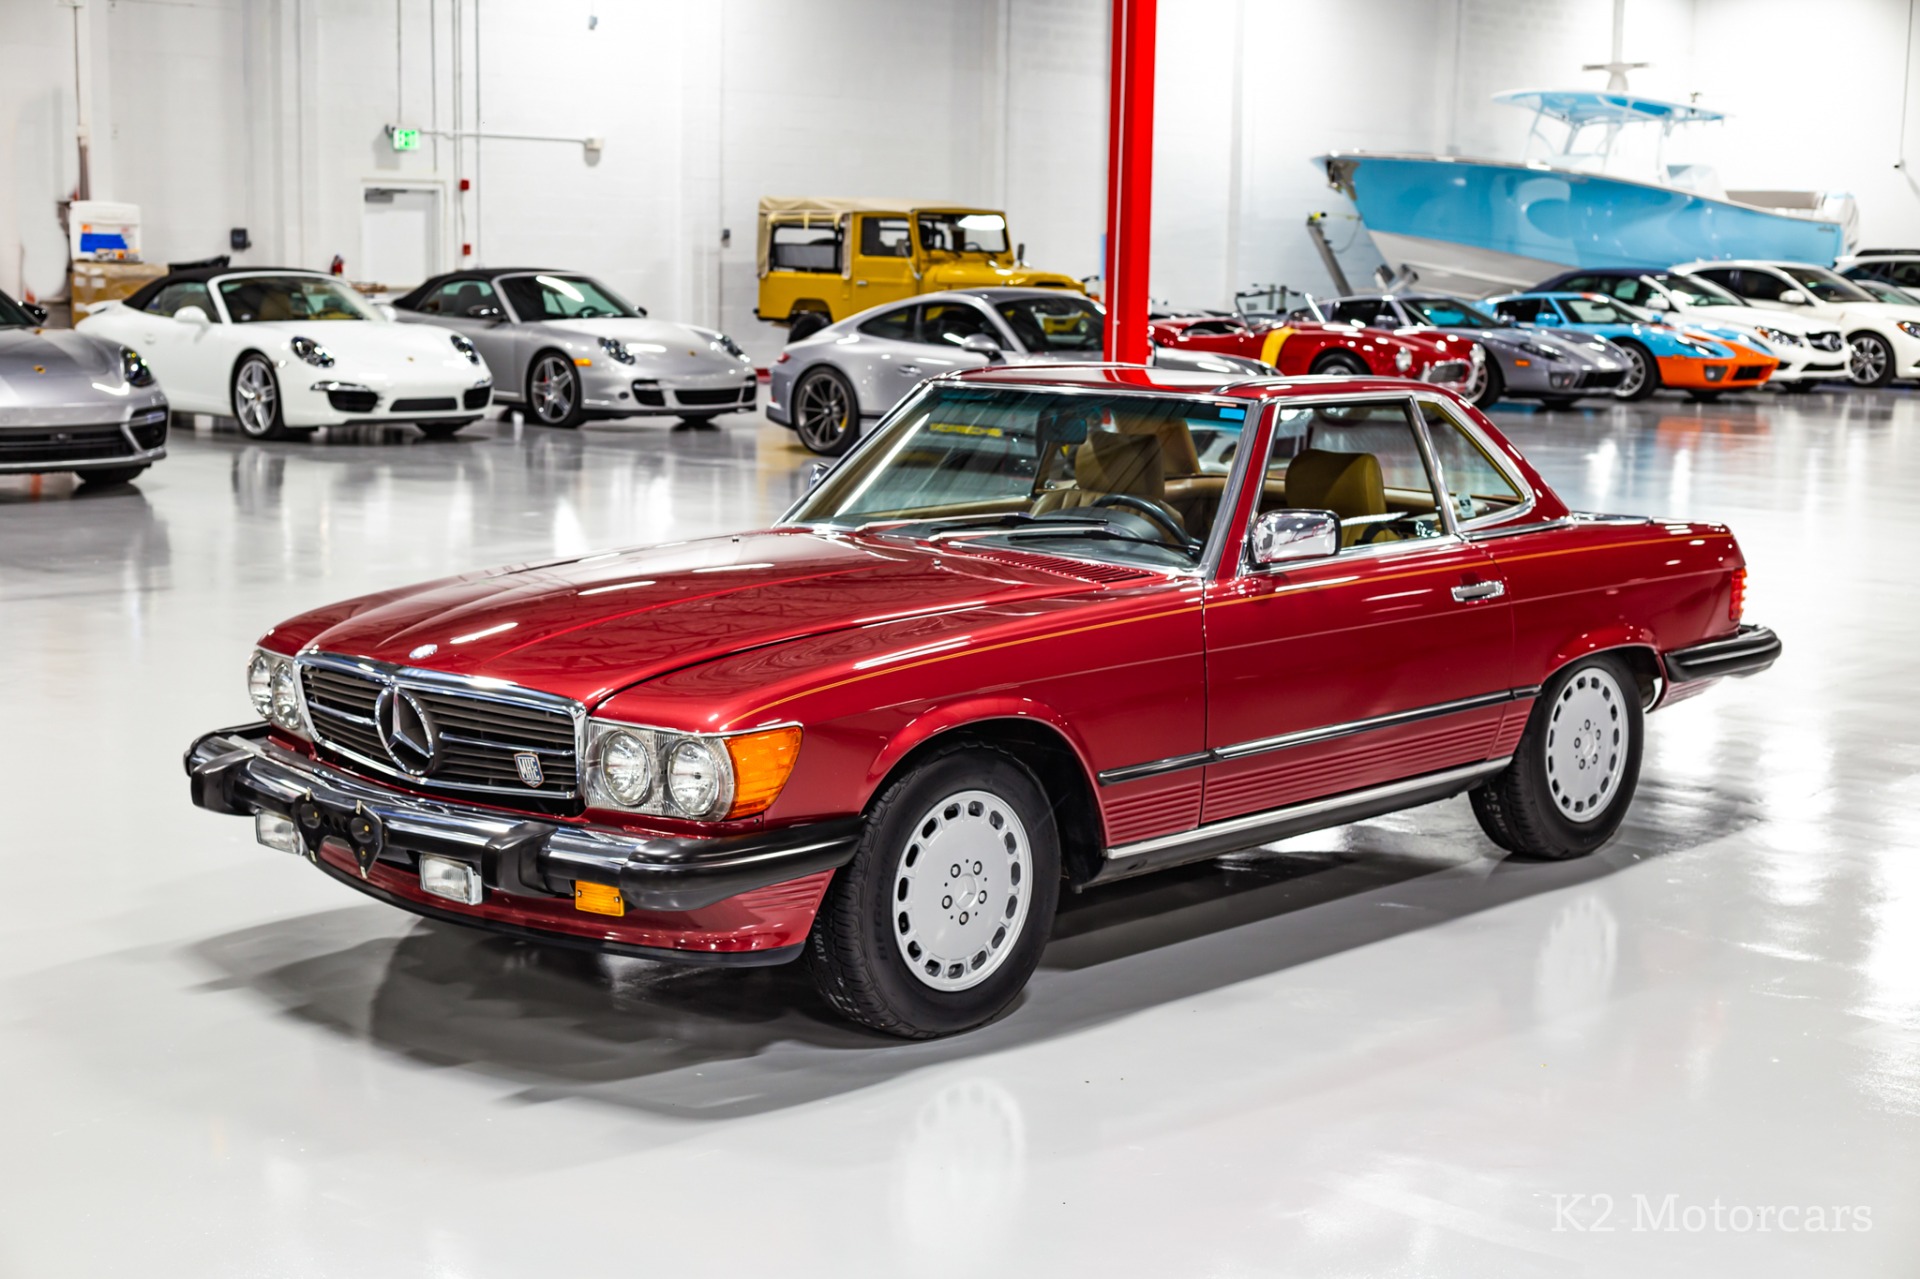 Used 1989 Mercedes Benz 560sl 560 Sl For Sale Sold K2 Motorcars Stock 00028